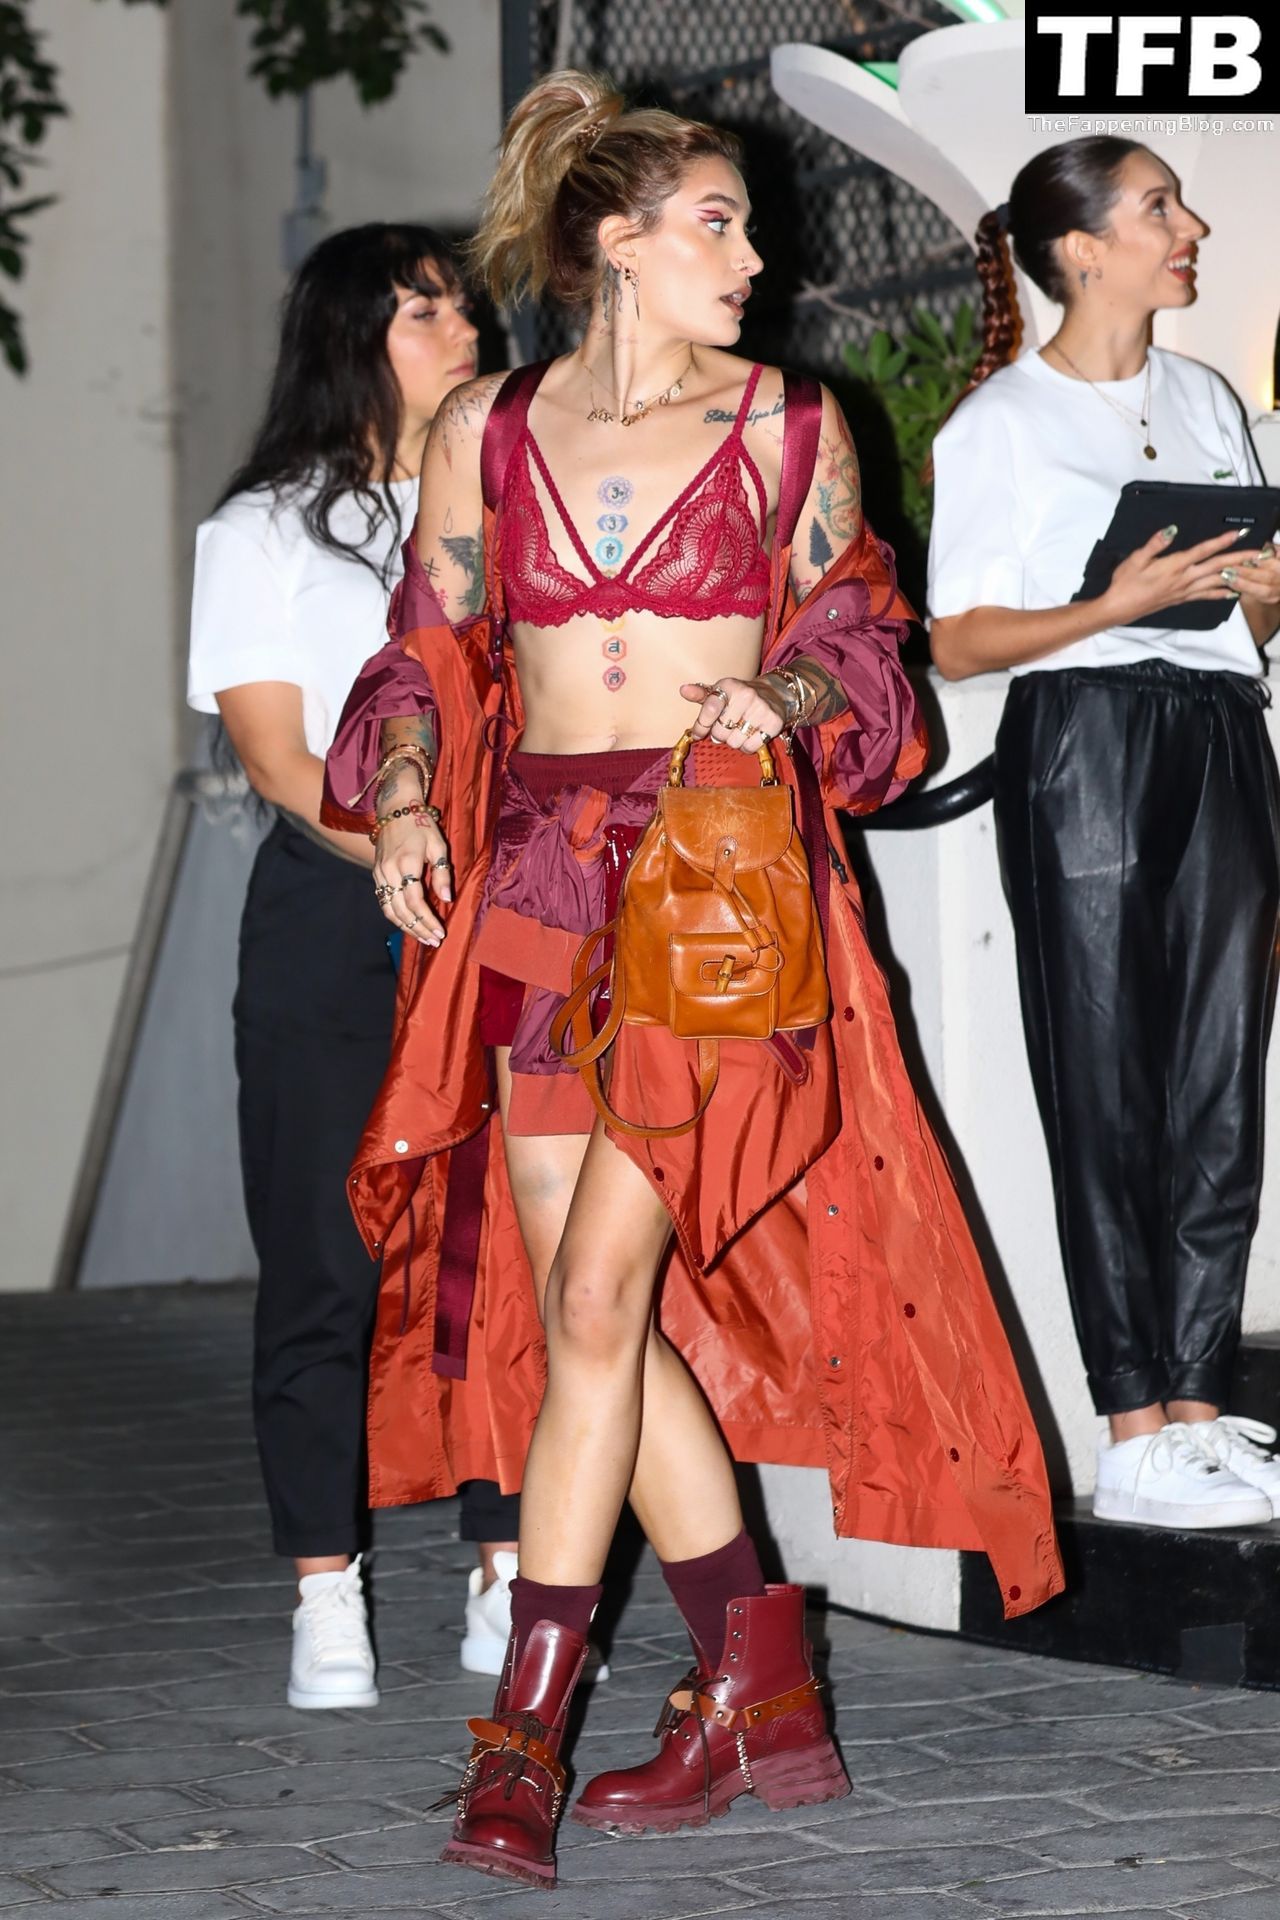 Paris Jackson See Through Nudity The Fappening Blog 14 - Paris Jackson Flashes Her Nude Tits Wearing a See-Through Bra in WeHo (34 Photos)